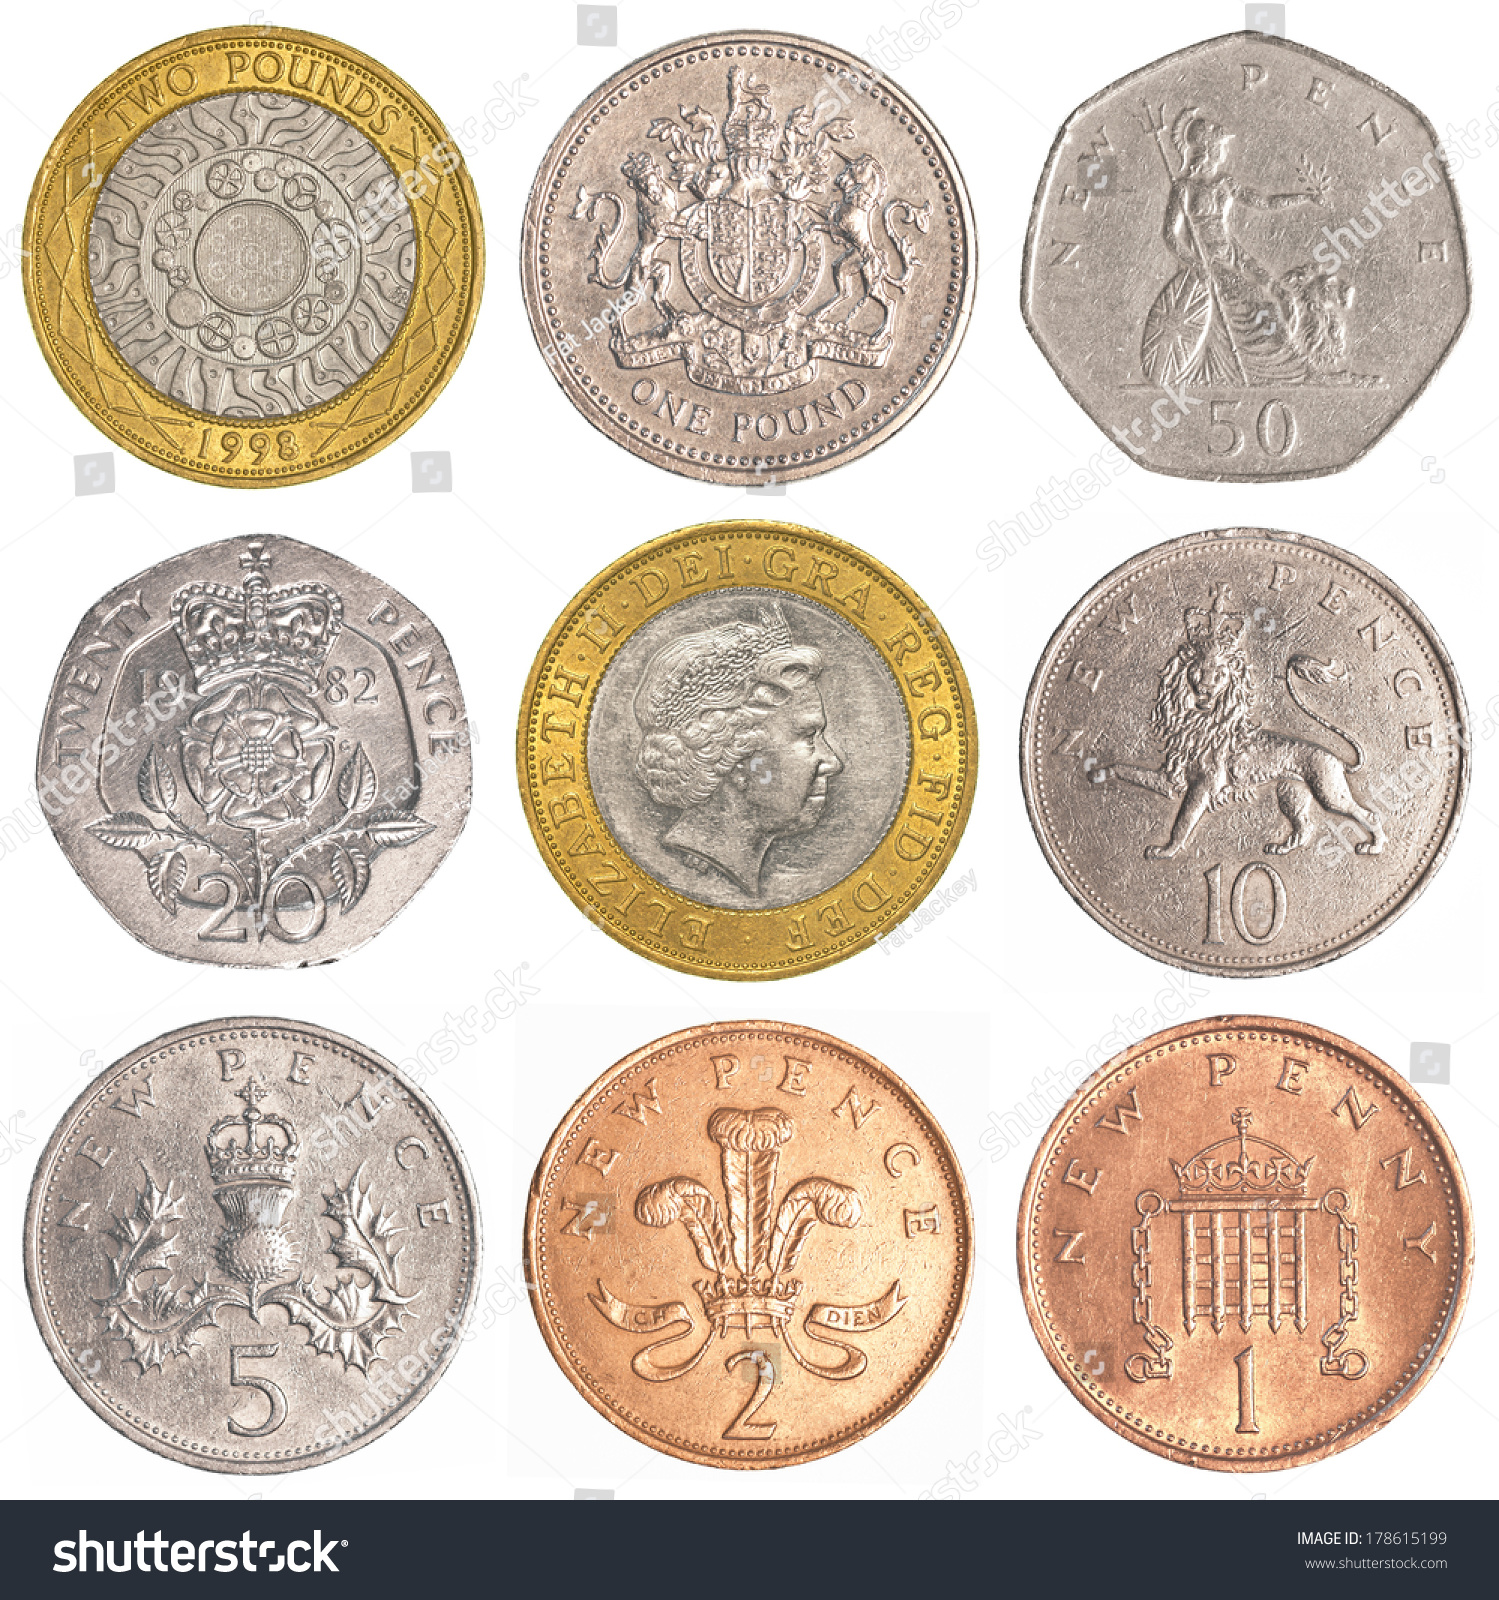 England Circulating Coins Collection Set Isolated Stock Photo ...